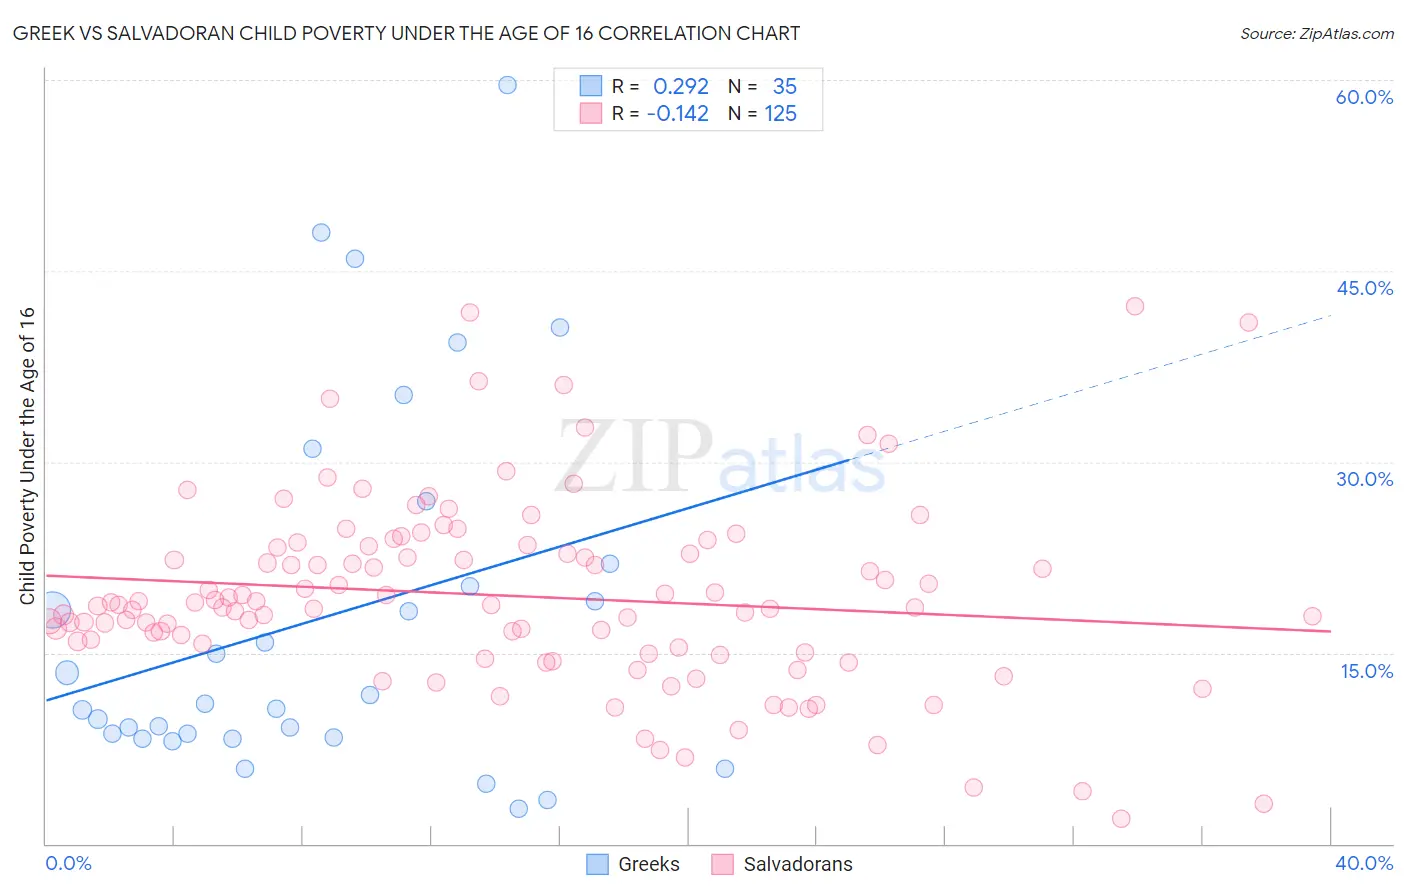 Greek vs Salvadoran Child Poverty Under the Age of 16